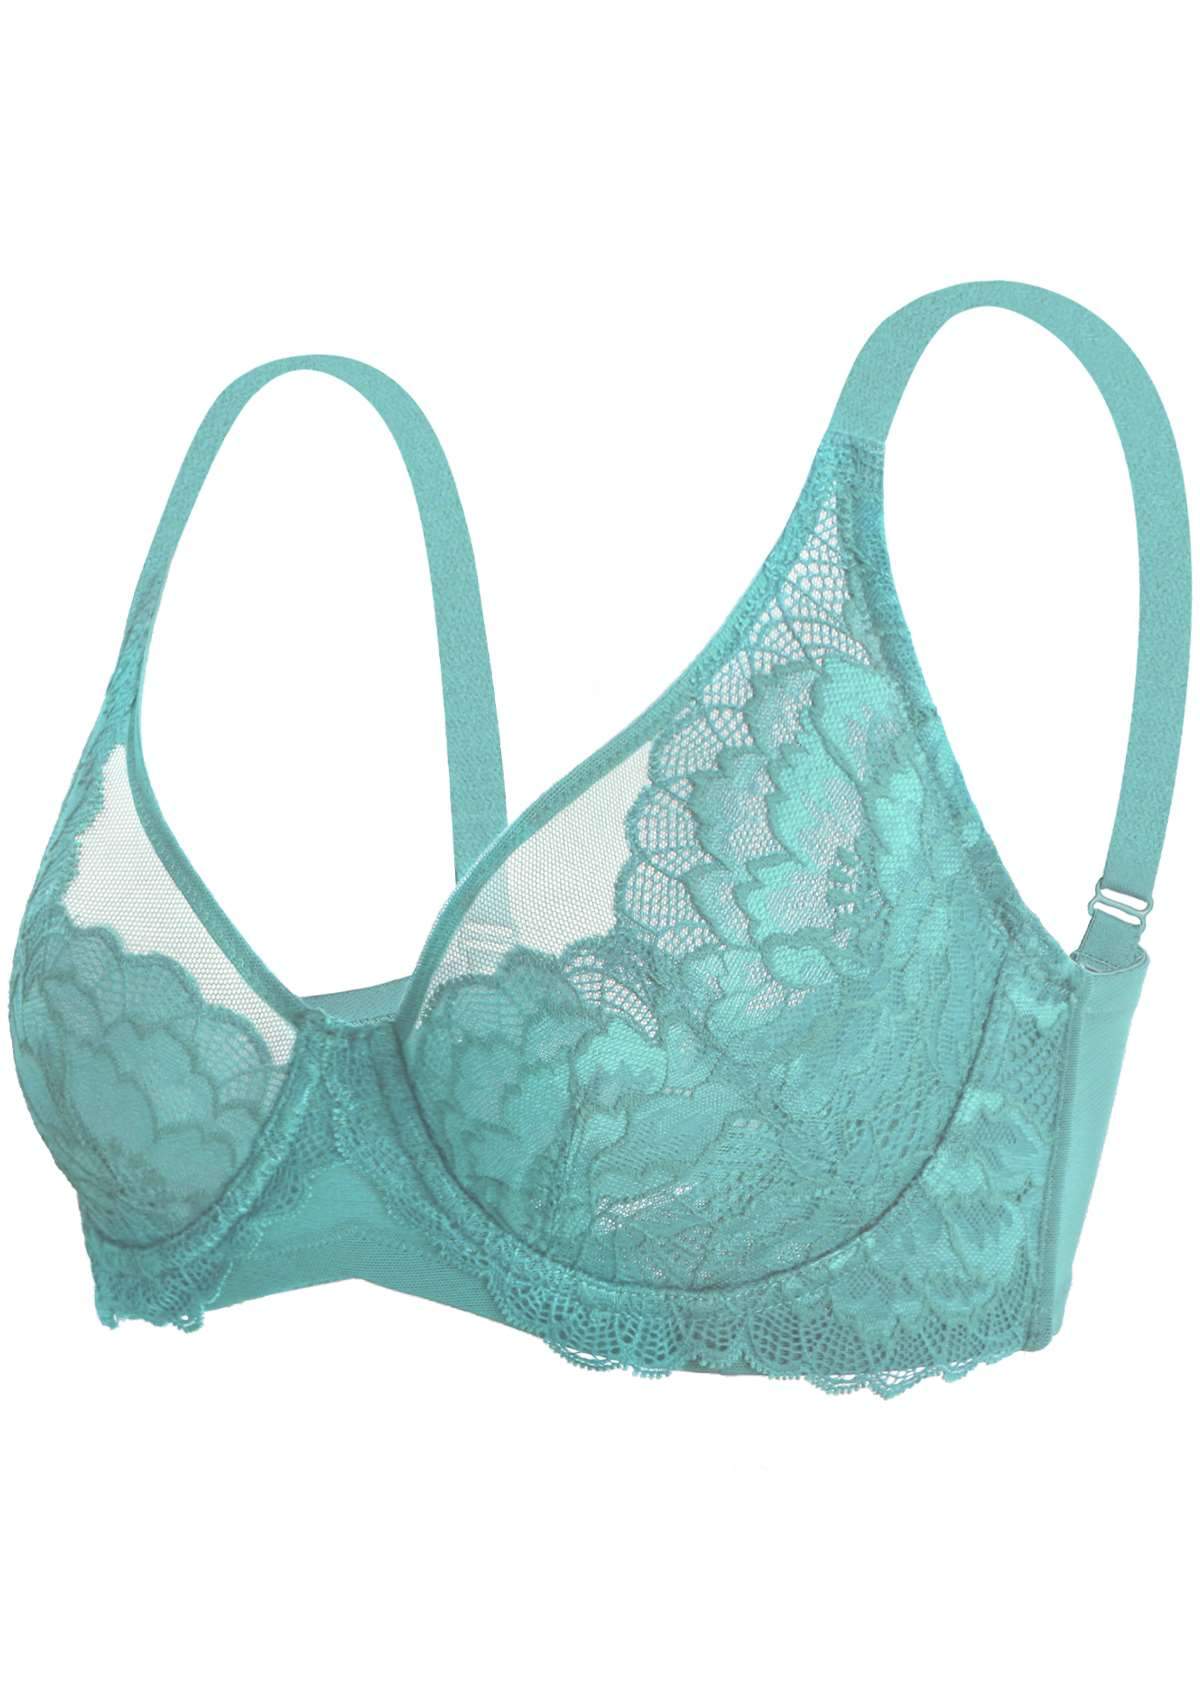 HSIA Peony Lace Unlined Supportive Underwire Bra - Green / 42 / D